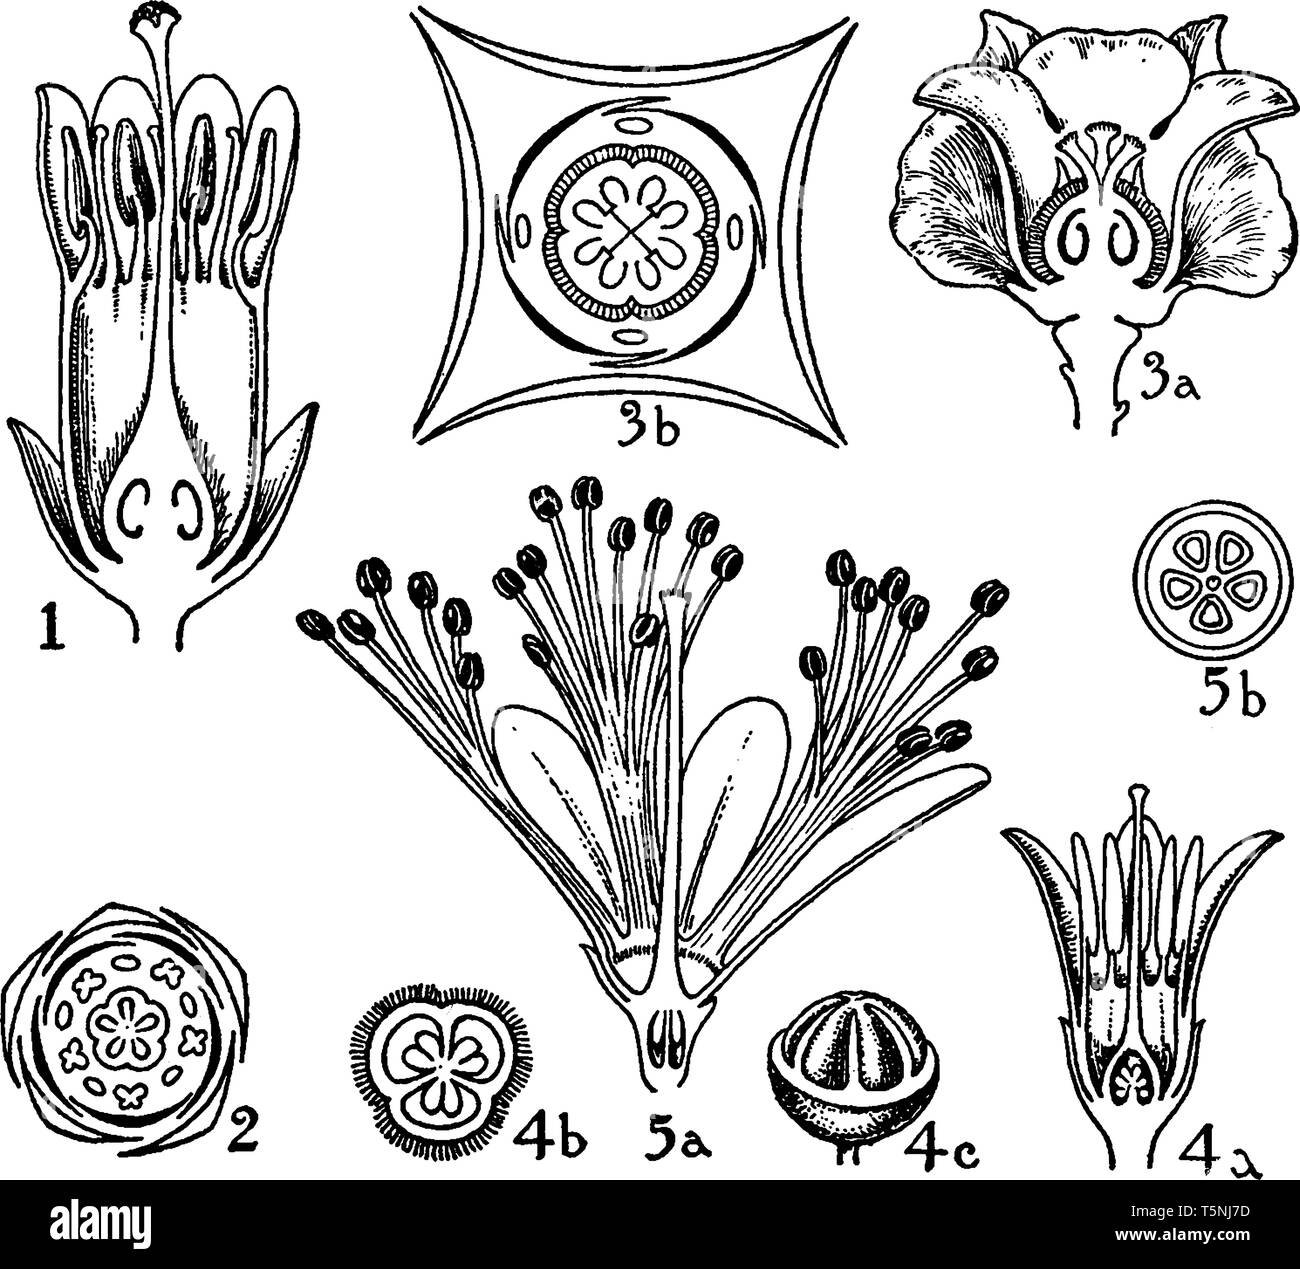 Orders of Sapotaceae, Ebenaceae, Styracaceae, and Symplocaceae are a family of flowering plants belonging to order Ericales, vintage line drawing or e Stock Vector